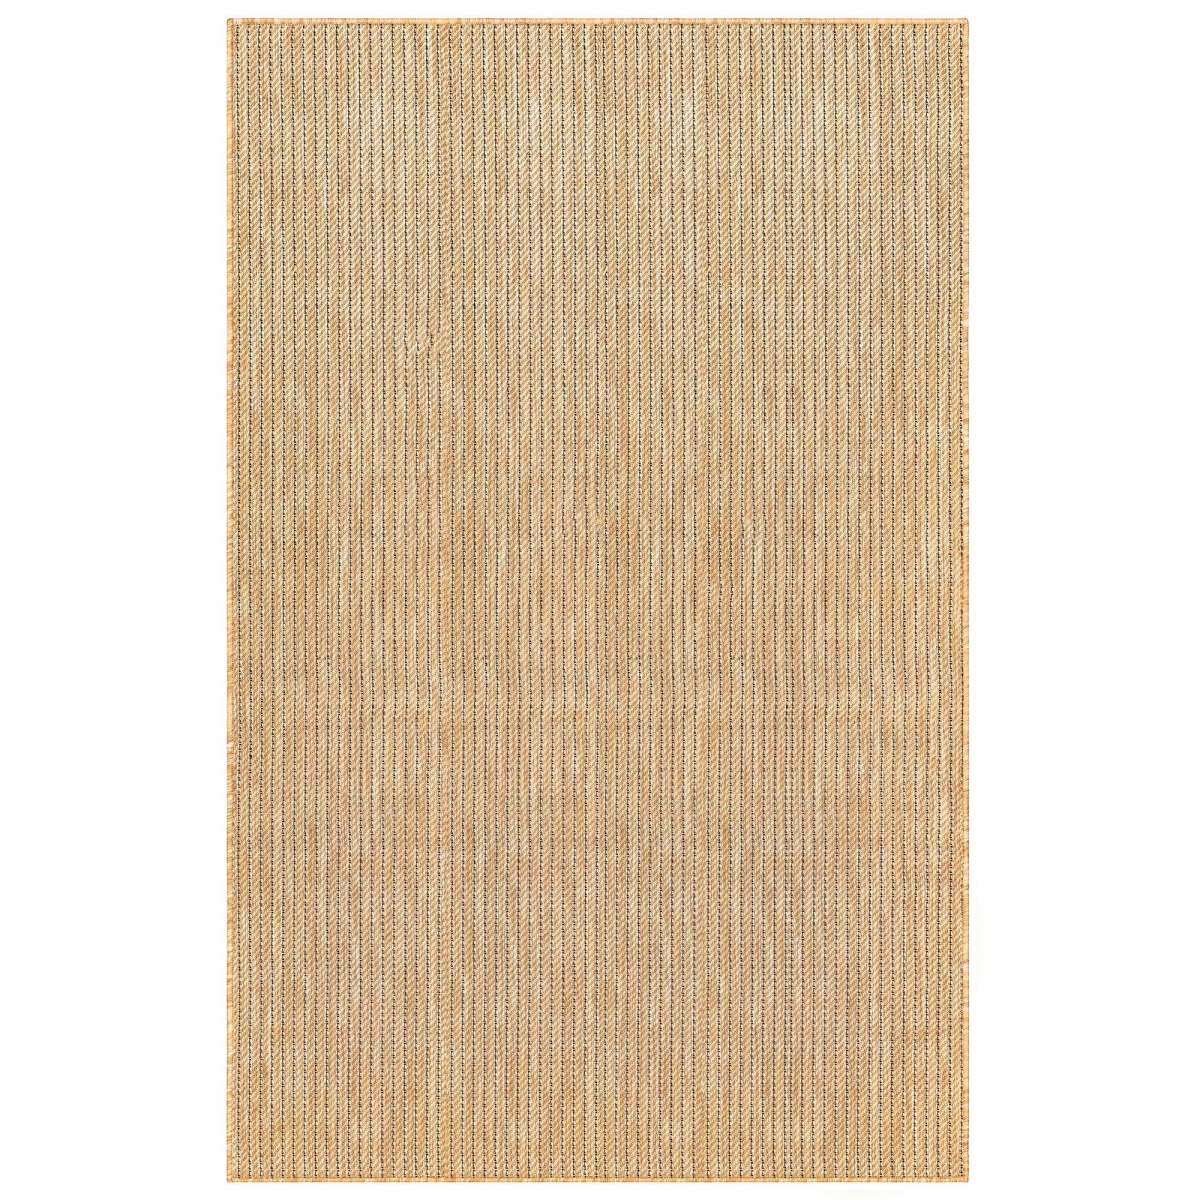 Trans-ocean Imports Cre80842212 7 Ft. 10 In. X 9 Ft. 10 In. Liora Manne Carmel Texture Stripe Indoor & Outdoor Wilton Woven Rectangle Rug - Sand